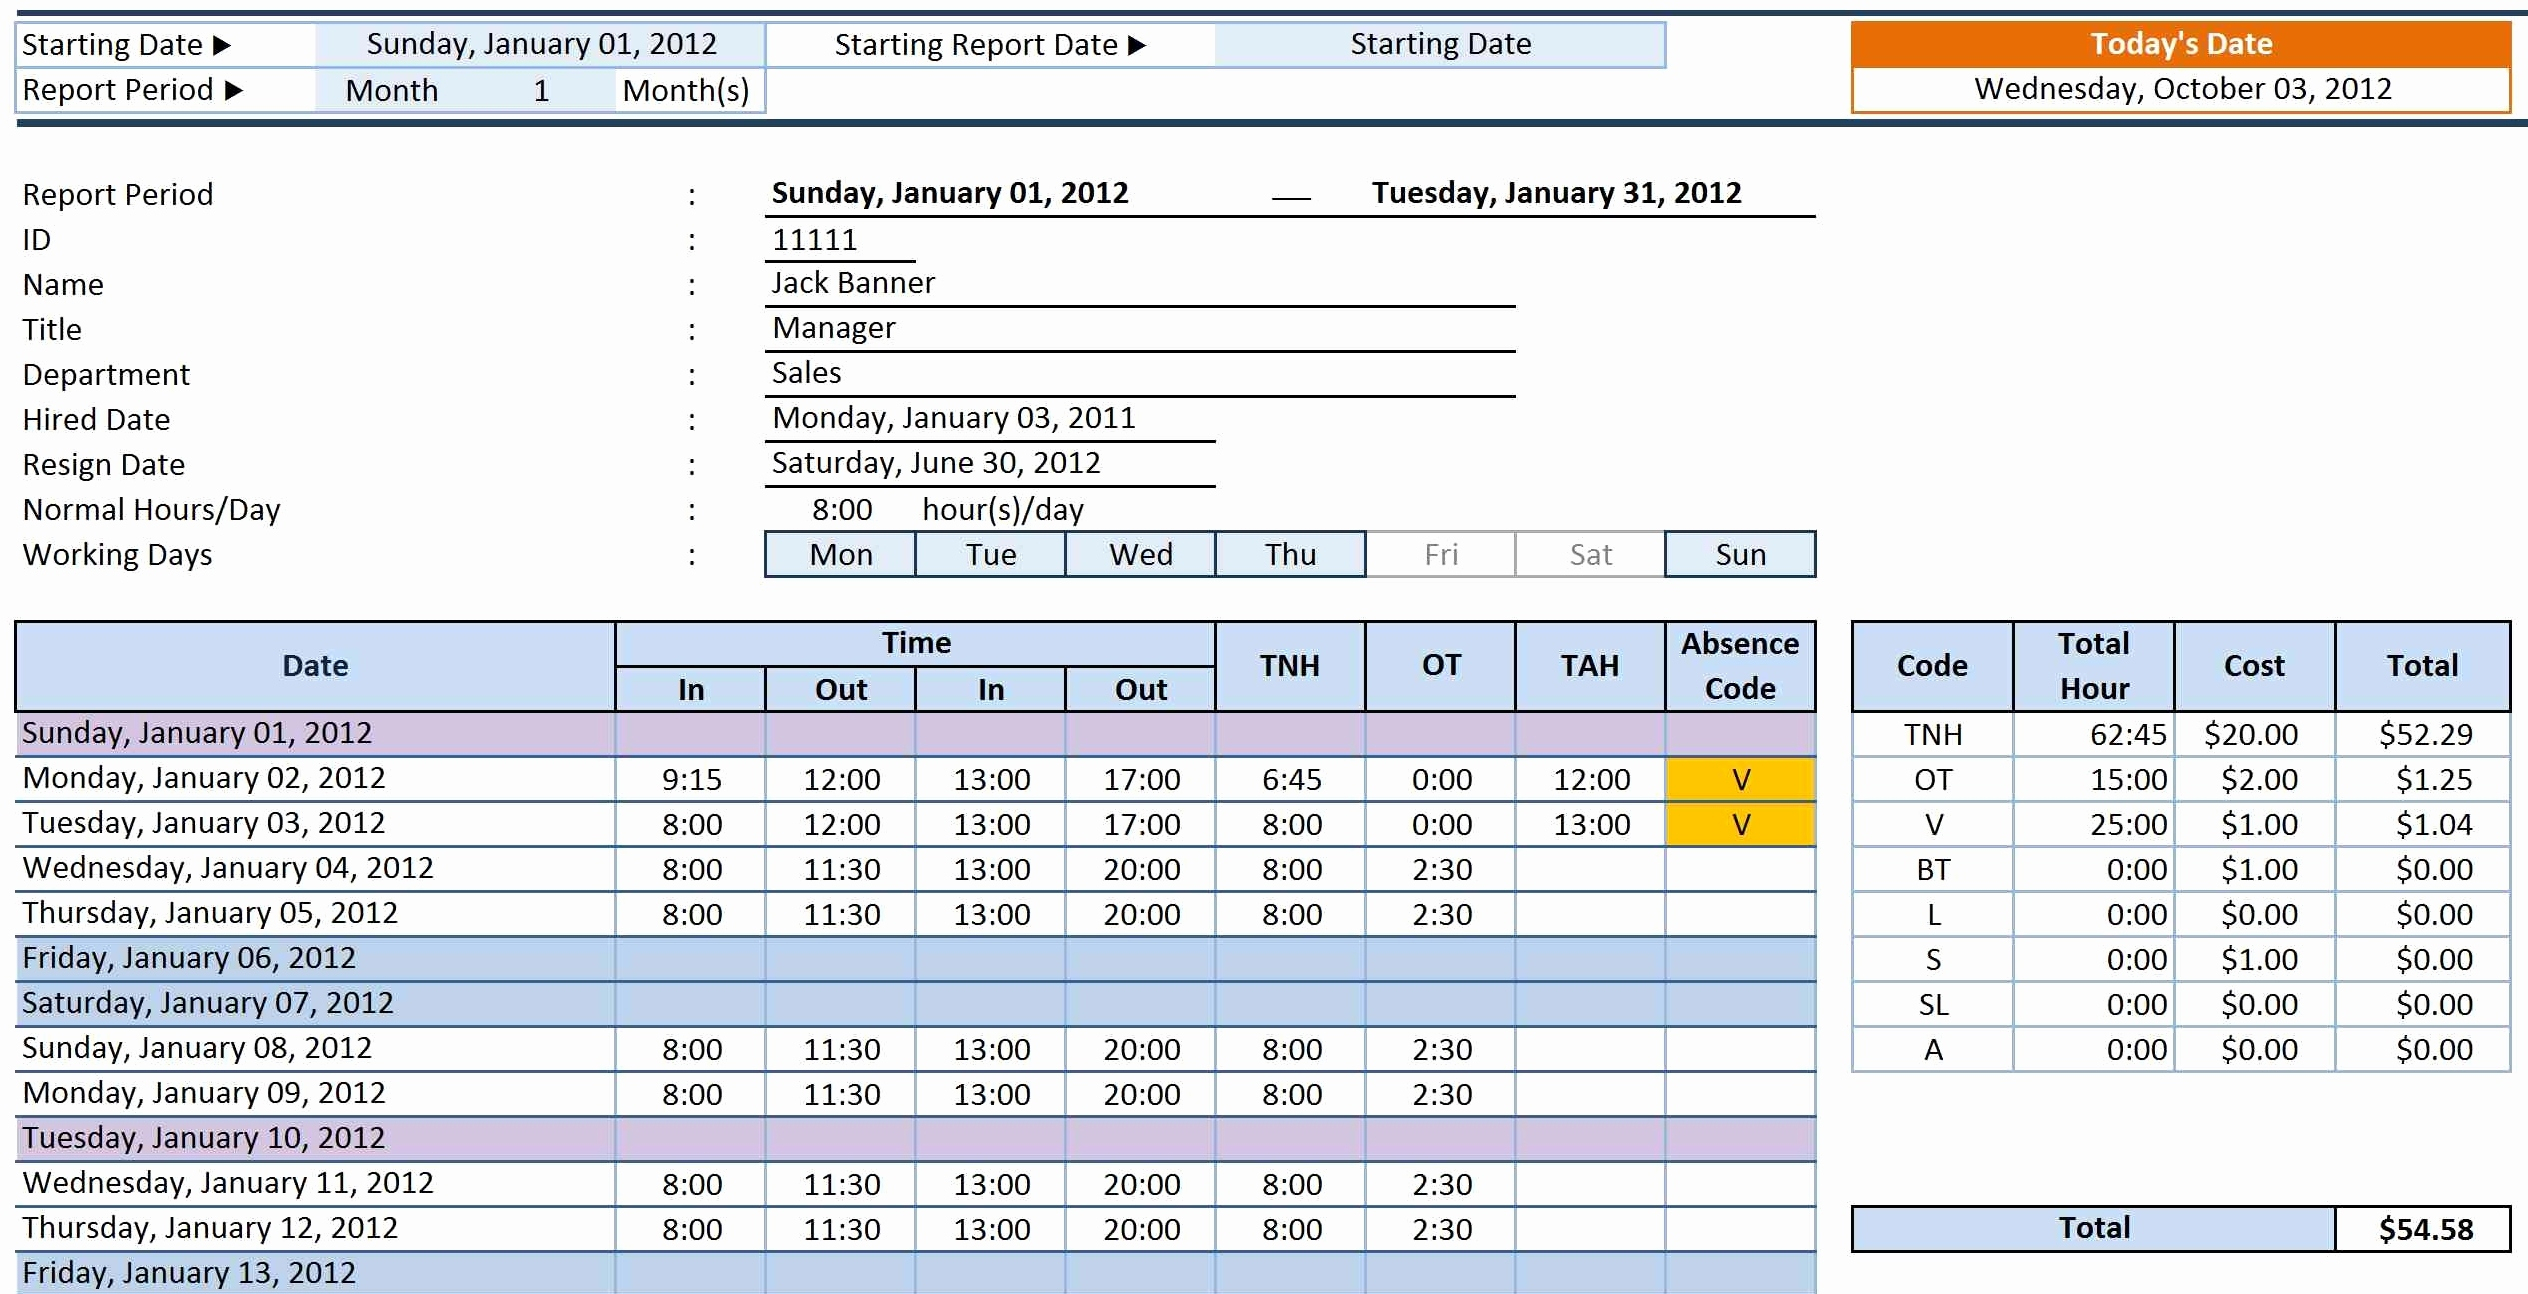 Holiday Calculator Spreadsheet Pertaining To Spreadsheet Example Of Holiday Calculator Typesreadsheets For Excel